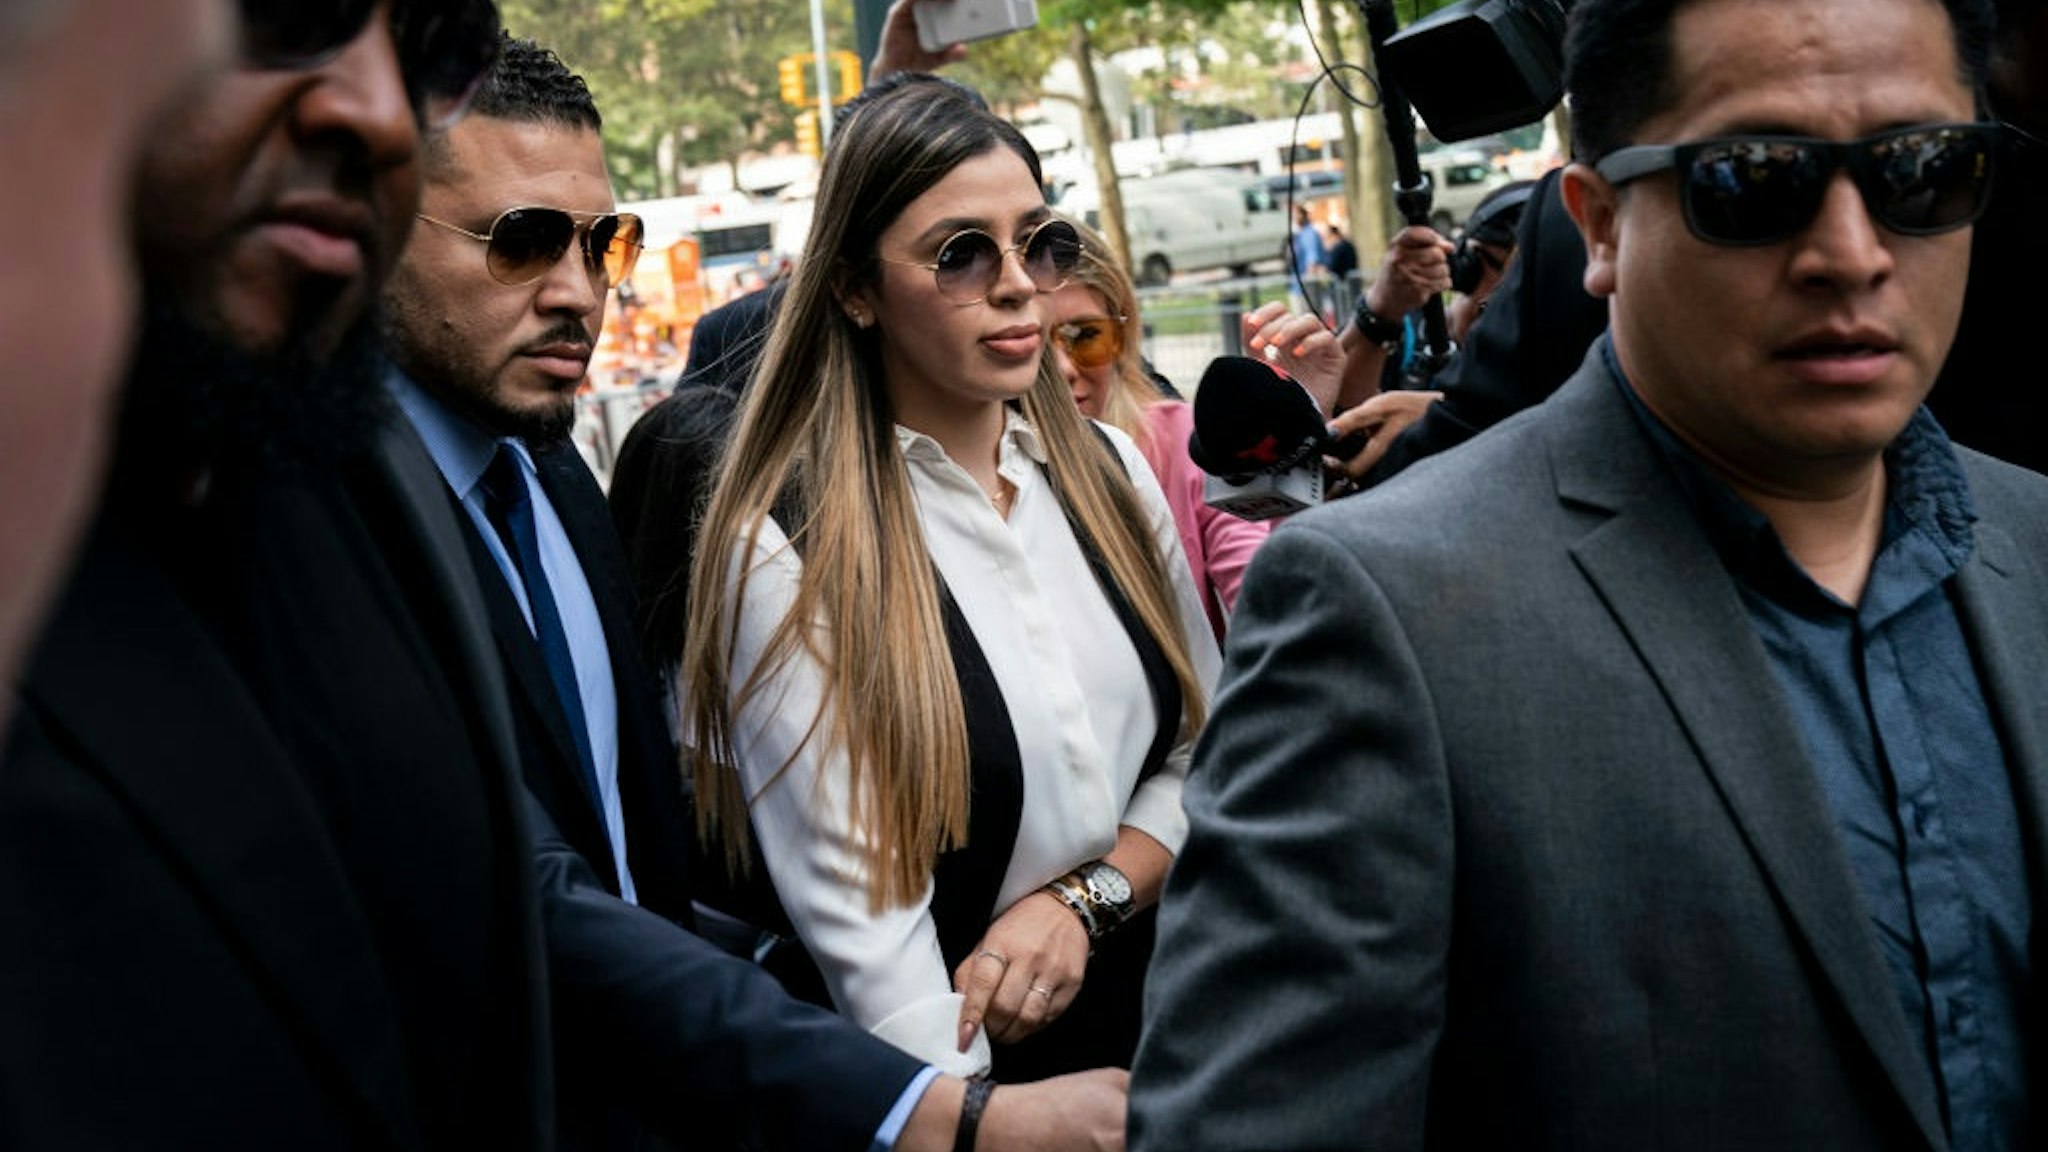 NEW YORK, NY - JULY 17: Emma Coronel Aispuro, wife of Joaquin "El Chapo" Guzman, is surrounded by security as she arrives at federal court on July 17, 2019 in New York City.